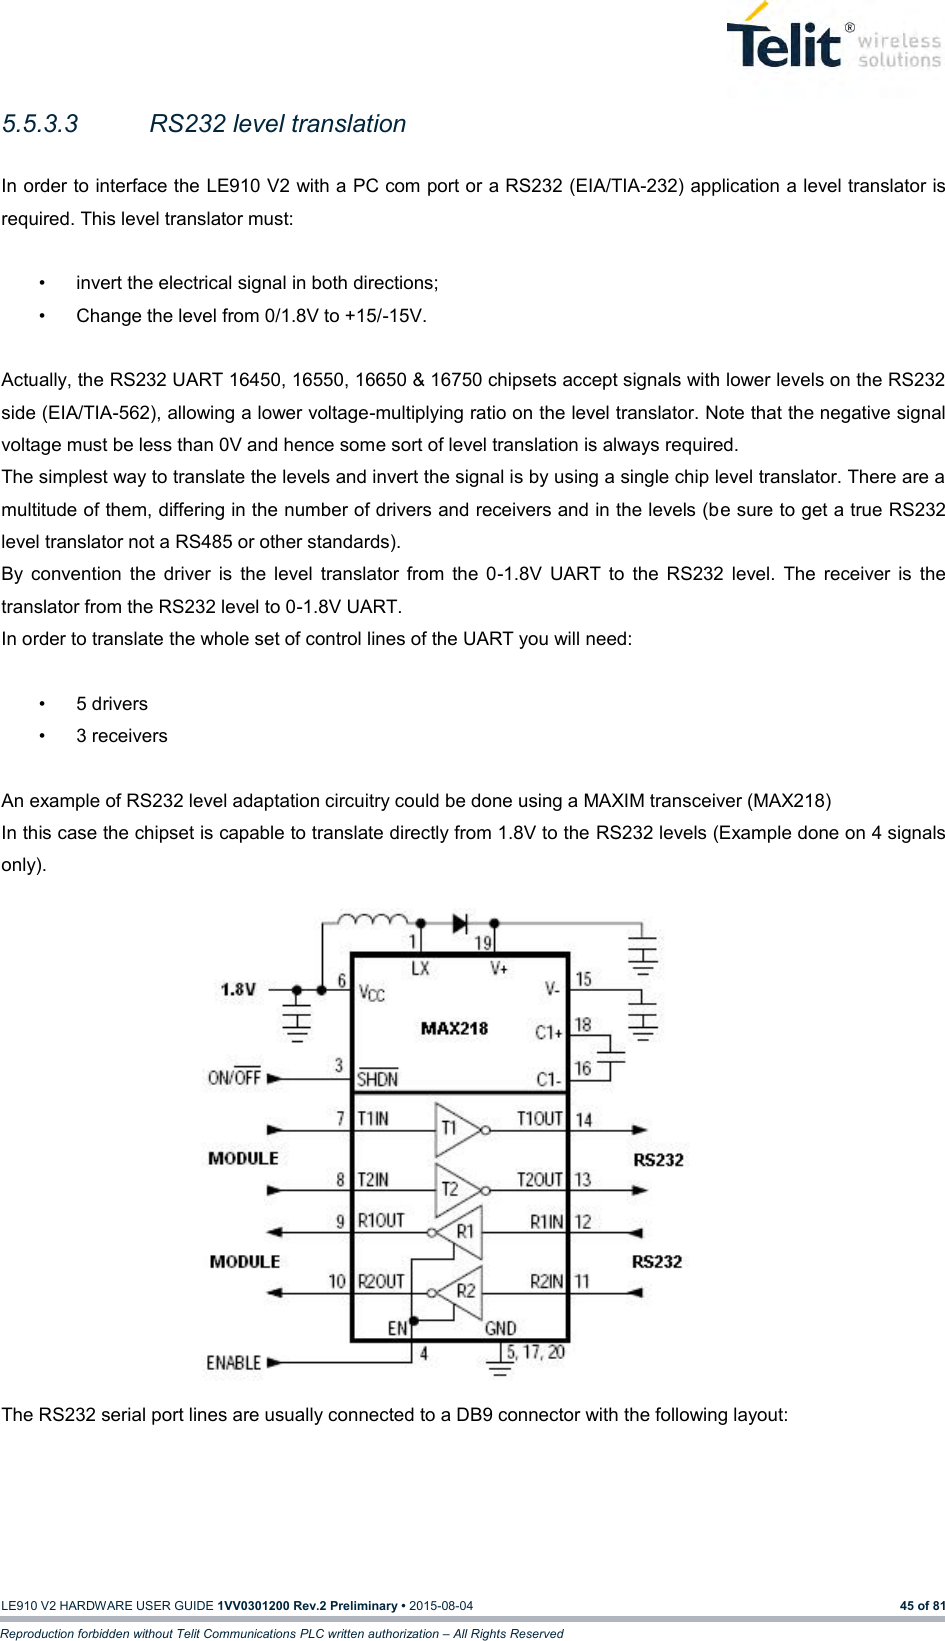   LE910 V2 HARDWARE USER GUIDE 1VV0301200 Rev.2 Preliminary • 2015-08-04 45 of 81 Reproduction forbidden without Telit Communications PLC written authorization – All Rights Reserved 5.5.3.3  RS232 level translation  In order to interface the LE910 V2 with a PC com port or a RS232 (EIA/TIA-232) application a level translator is required. This level translator must:  •  invert the electrical signal in both directions; •  Change the level from 0/1.8V to +15/-15V.  Actually, the RS232 UART 16450, 16550, 16650 &amp; 16750 chipsets accept signals with lower levels on the RS232 side (EIA/TIA-562), allowing a lower voltage-multiplying ratio on the level translator. Note that the negative signal voltage must be less than 0V and hence some sort of level translation is always required.  The simplest way to translate the levels and invert the signal is by using a single chip level translator. There are a multitude of them, differing in the number of drivers and receivers and in the levels (be sure to get a true RS232 level translator not a RS485 or other standards). By  convention  the  driver  is  the  level  translator  from  the  0-1.8V  UART  to  the  RS232  level.  The  receiver  is  the translator from the RS232 level to 0-1.8V UART. In order to translate the whole set of control lines of the UART you will need:  •  5 drivers •  3 receivers  An example of RS232 level adaptation circuitry could be done using a MAXIM transceiver (MAX218)  In this case the chipset is capable to translate directly from 1.8V to the RS232 levels (Example done on 4 signals only).                 The RS232 serial port lines are usually connected to a DB9 connector with the following layout: 